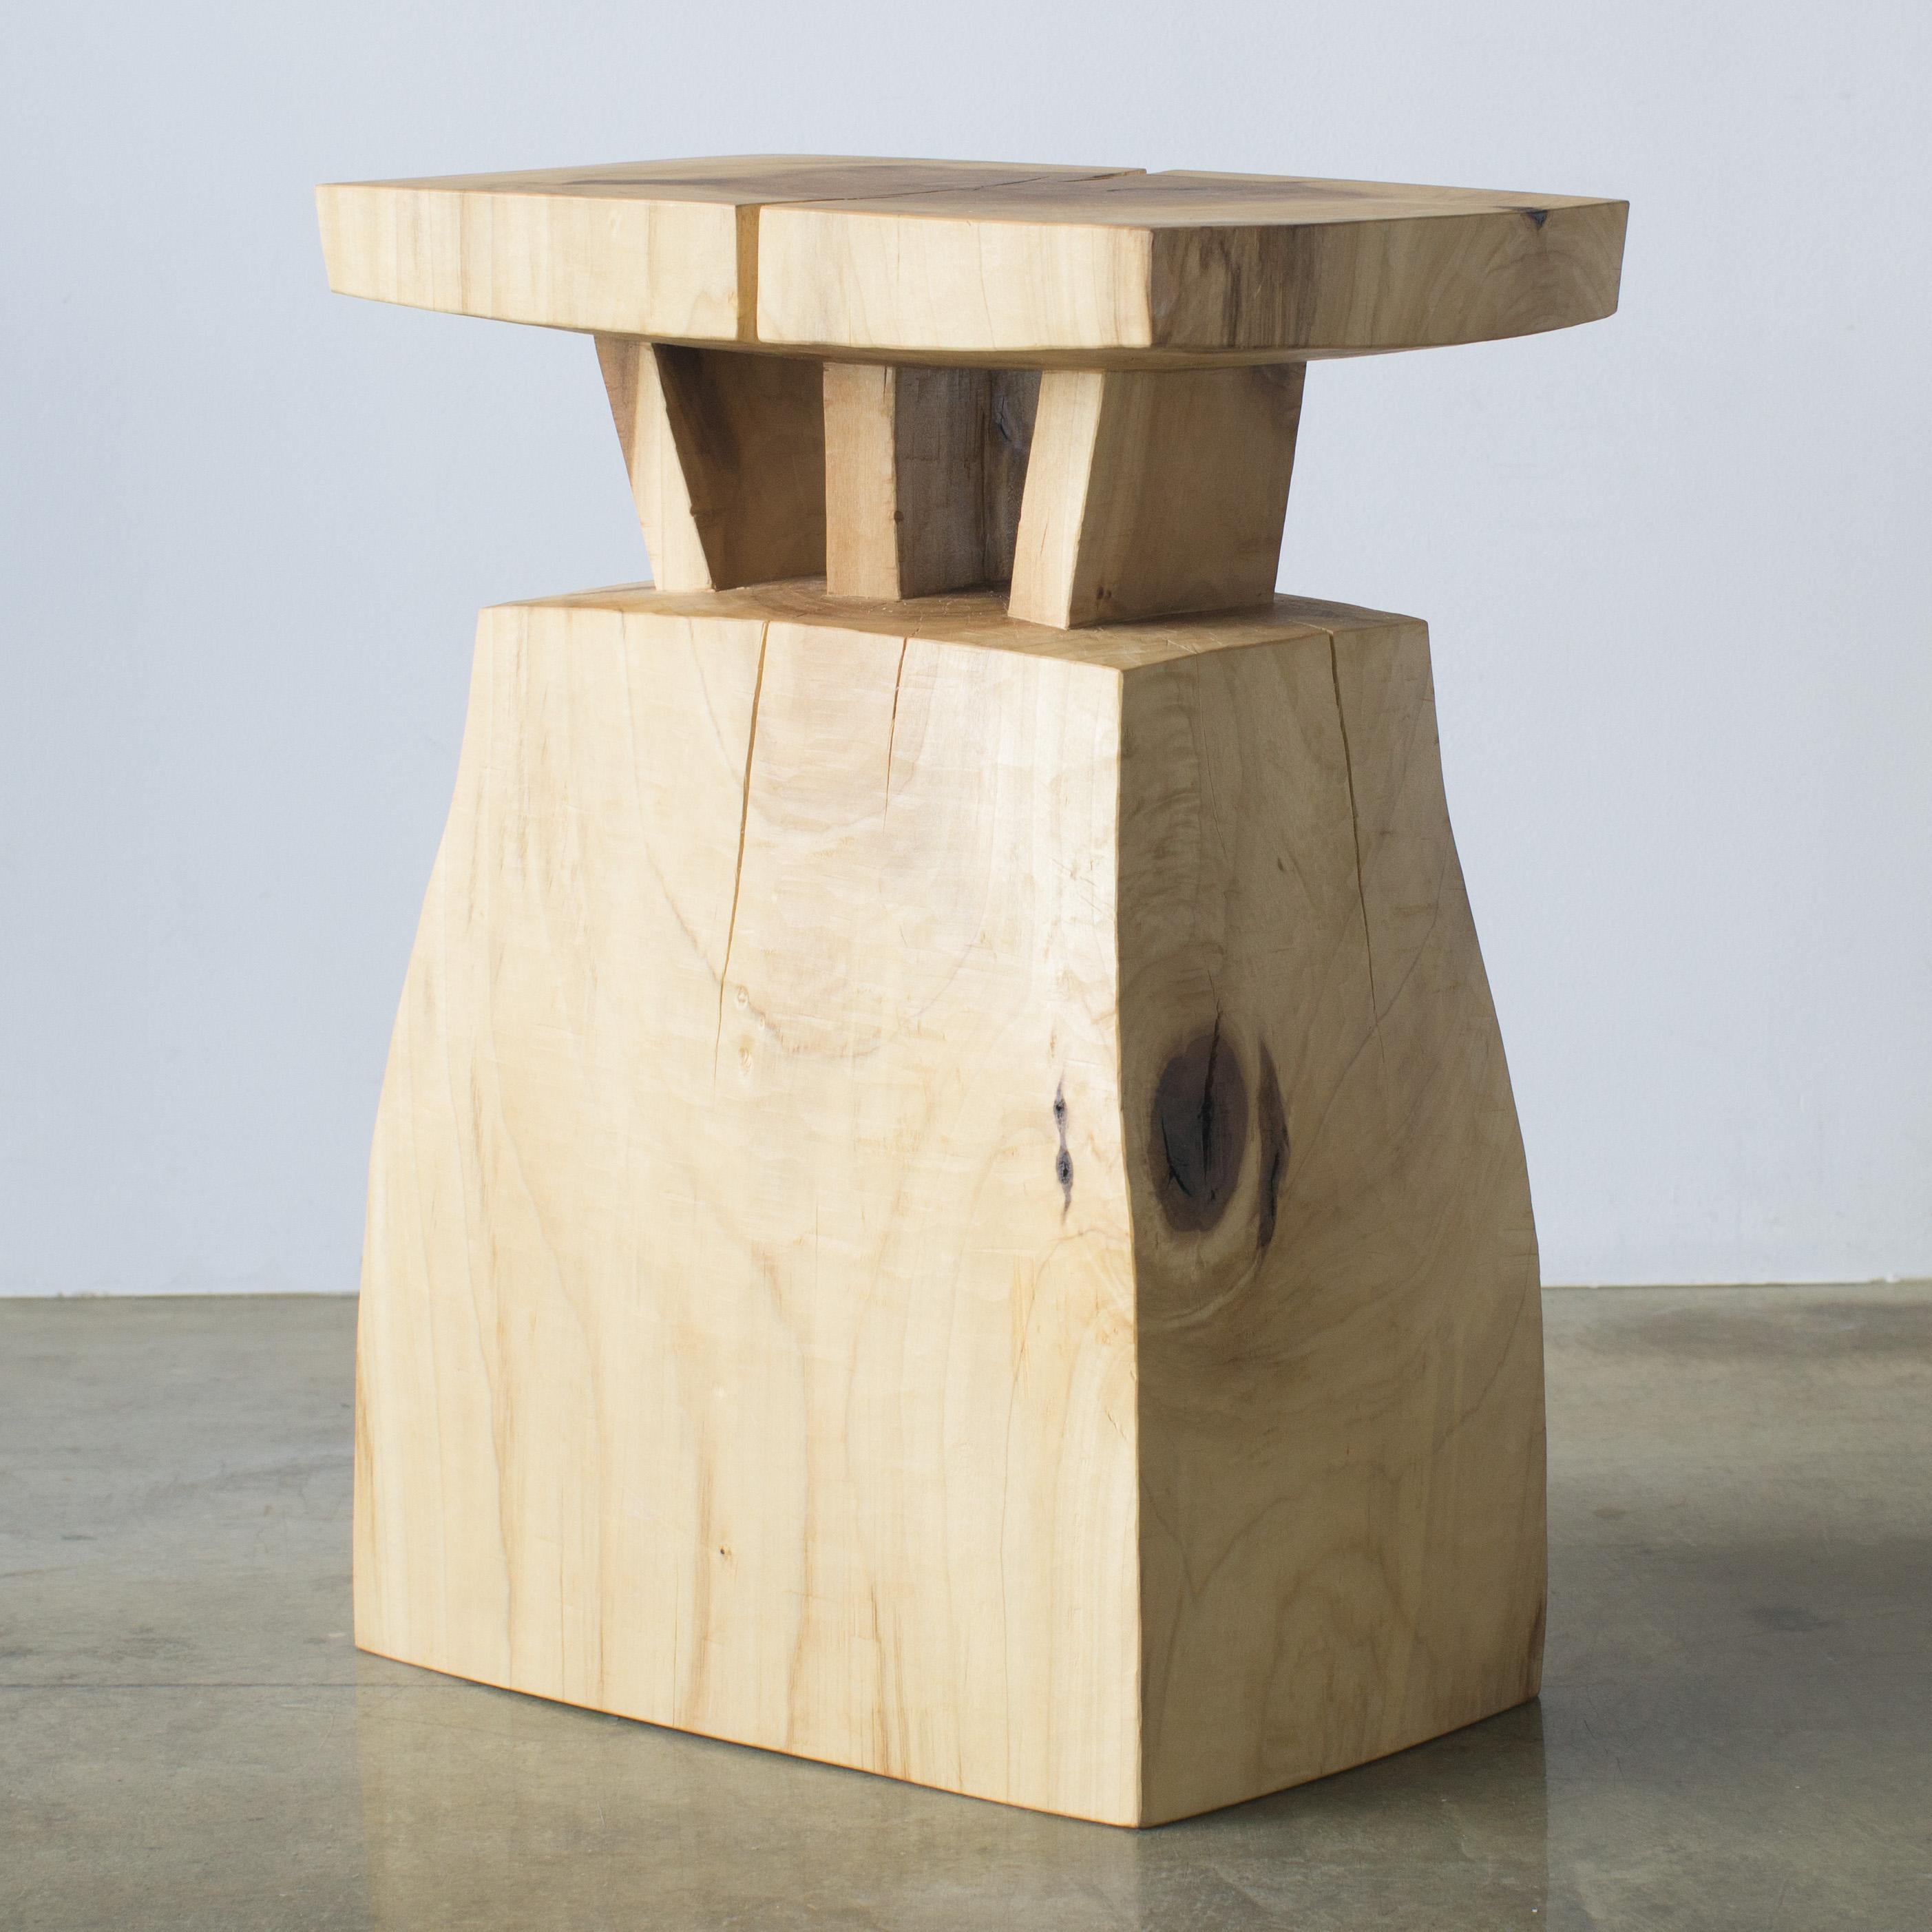 Name: Weight
Sculptural stool by Zogei carved furniture
Material: magnolia
This work is carved from log with some kinds of chainsaws.
Most of wood used for Nishimura's works are unable to use anything, these woods are unsuitable material for